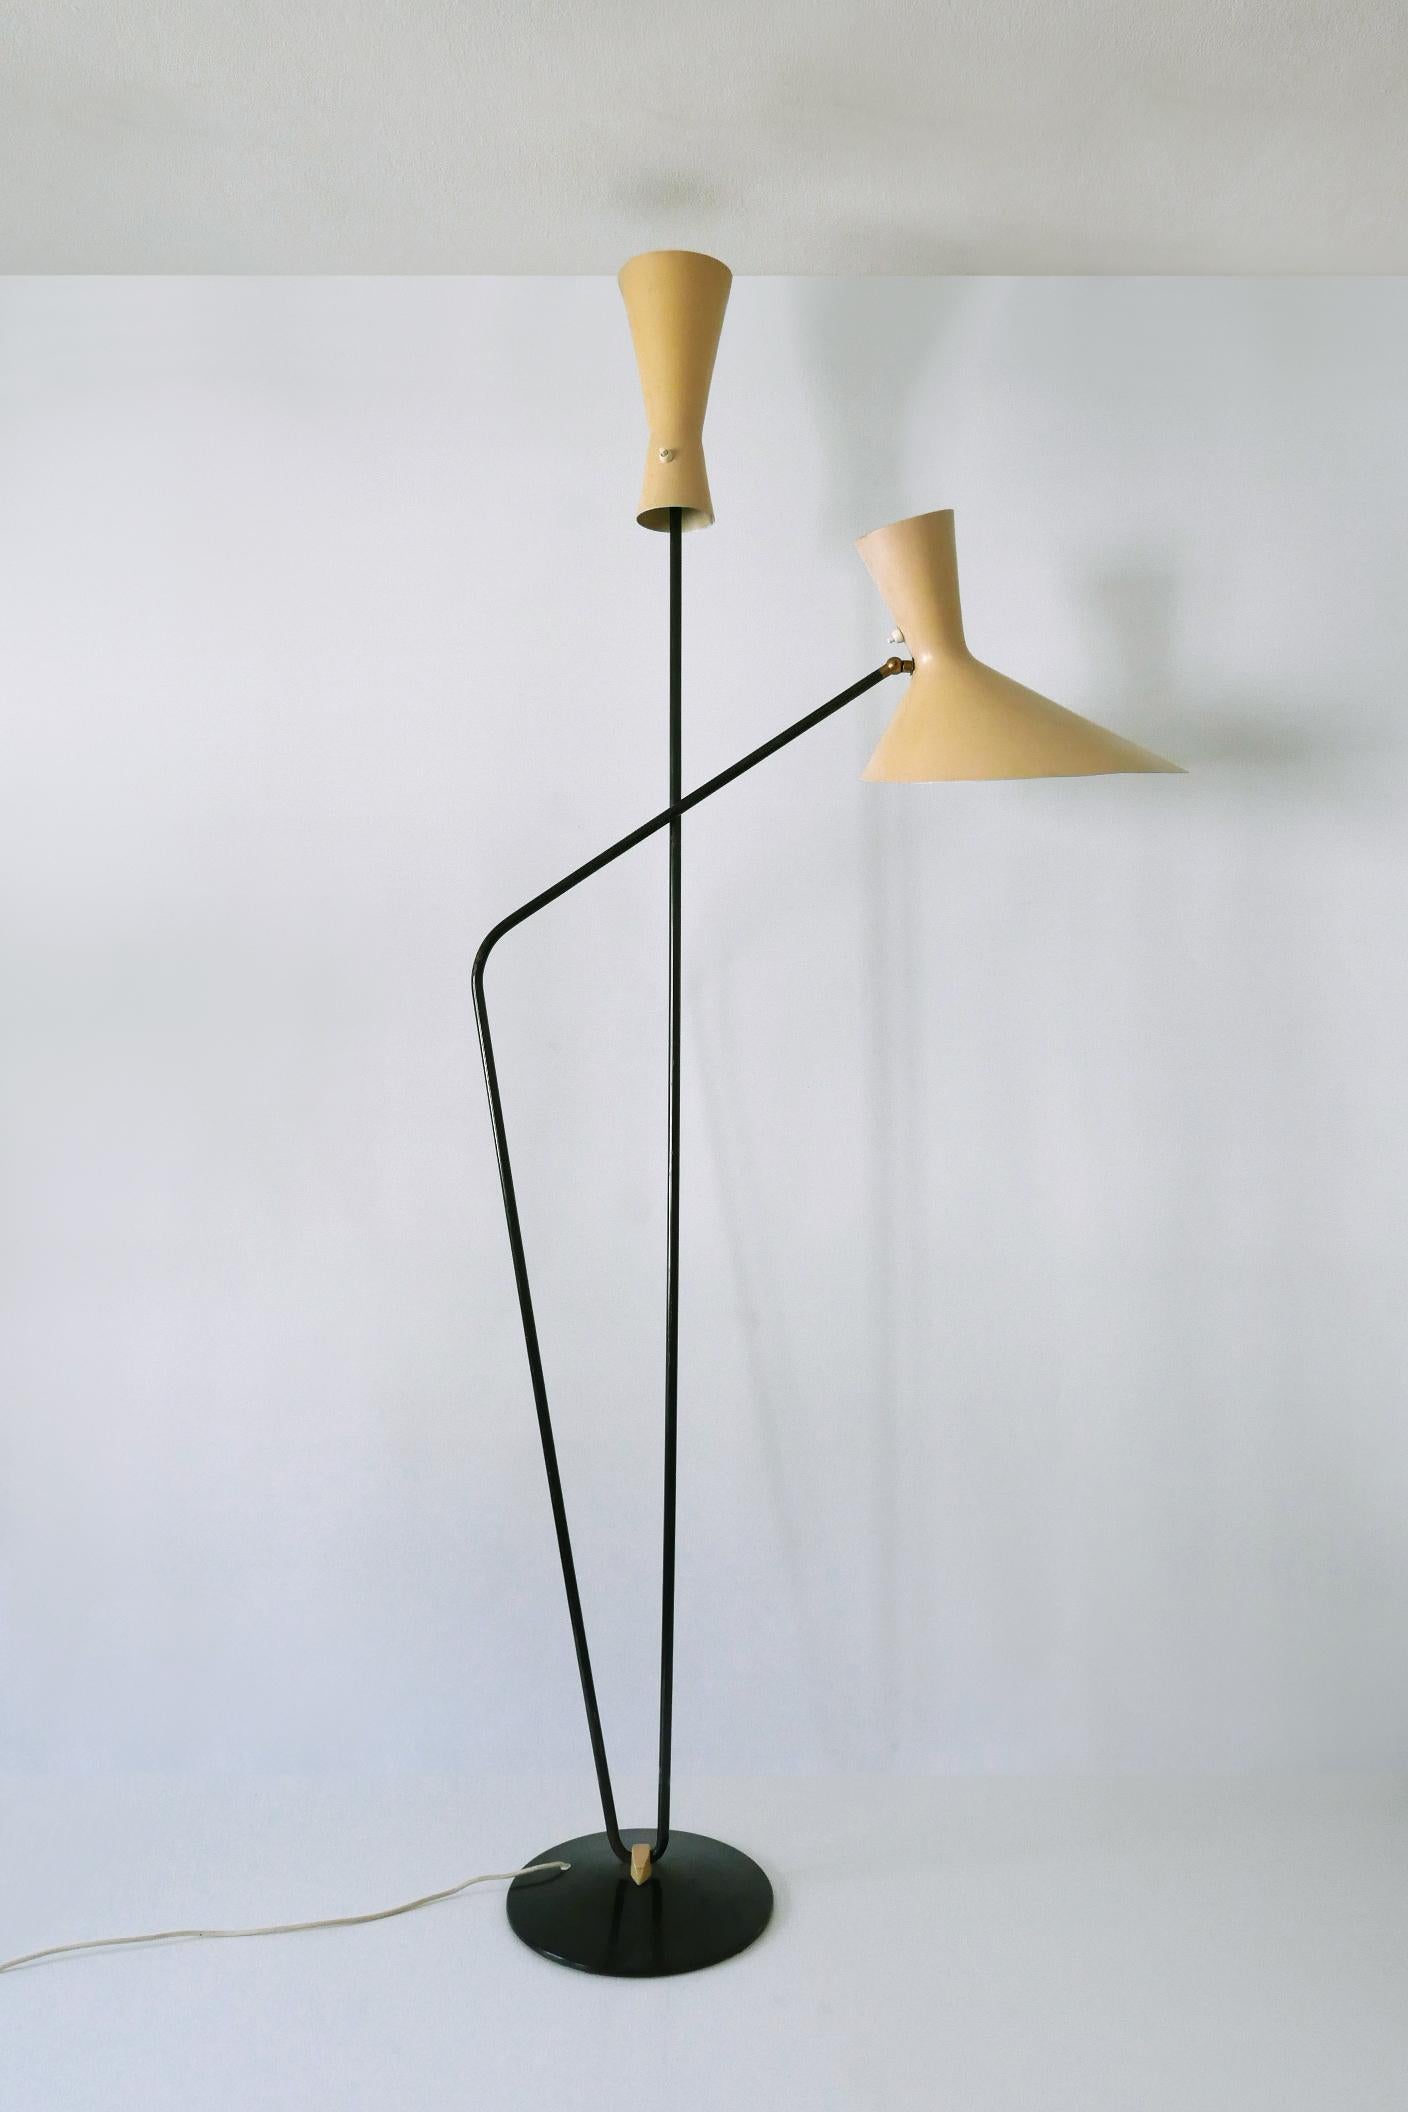 Extremely rare and  iconic floor lamp or reading light. One of the shade adjustable. Designed by Prof. Carl Moor for BAG Turgi, Switzerland, 1950s.

Executed in metal and aluminium, the lamp needs 2 x E27 / E26 Edison screw fit bulbs, is wired, and